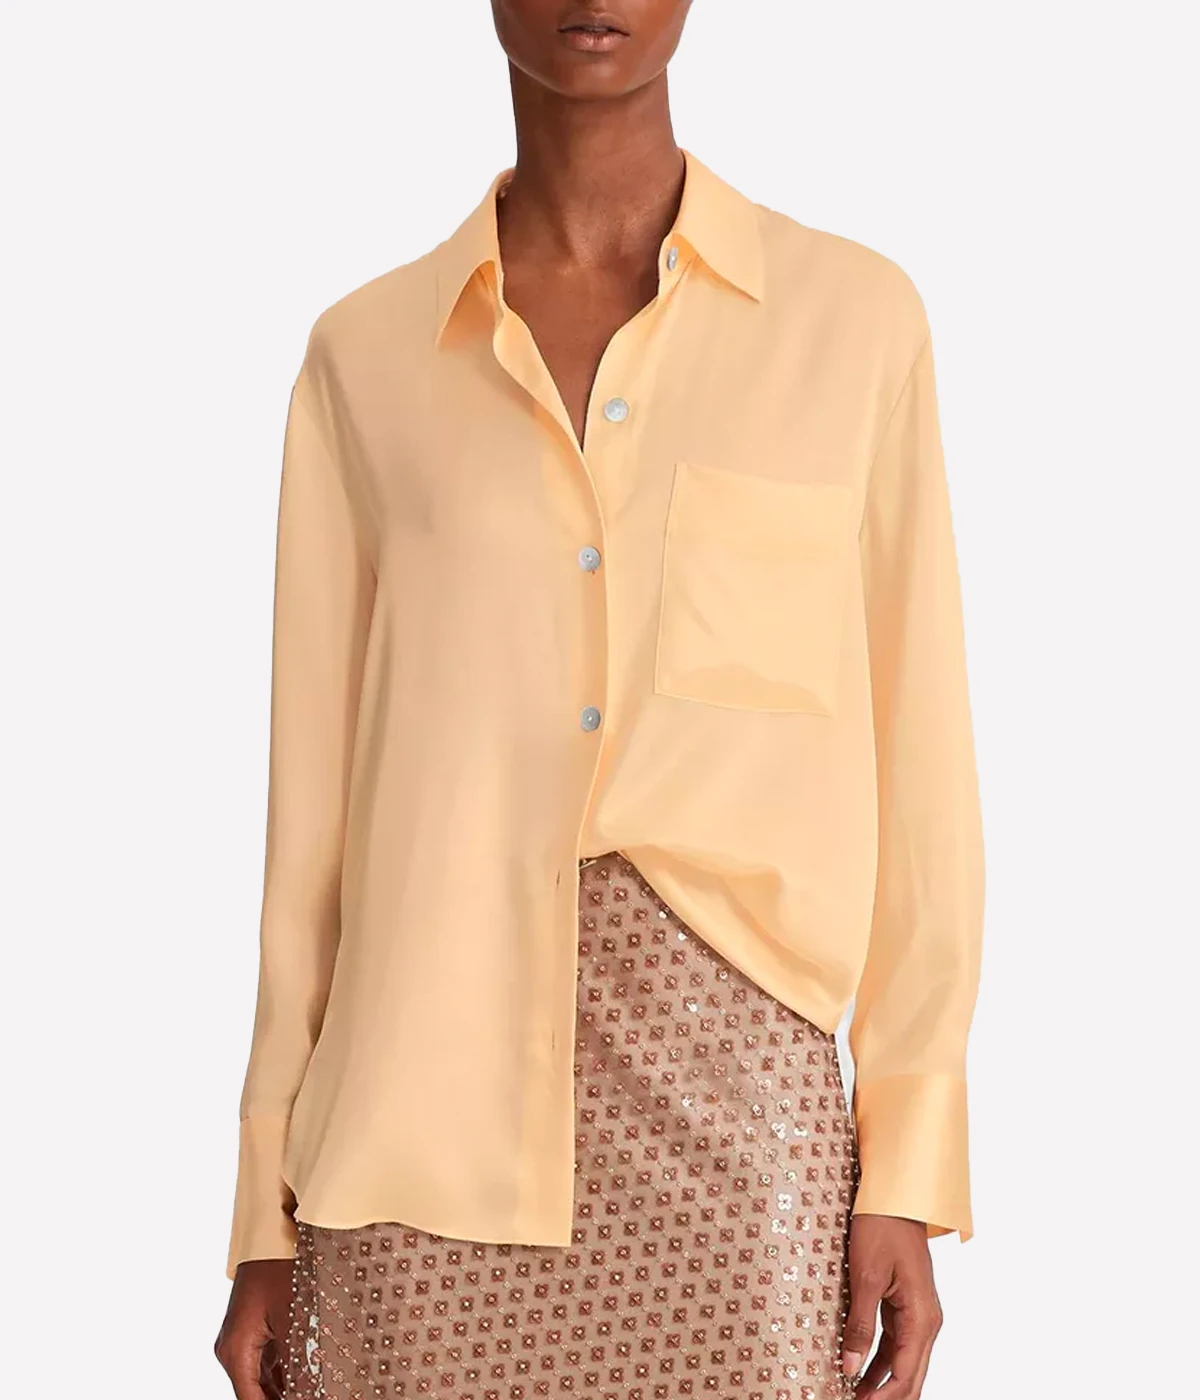 Relaxed Long Sleeve Chest Pocket Blouse in Pale Ochre